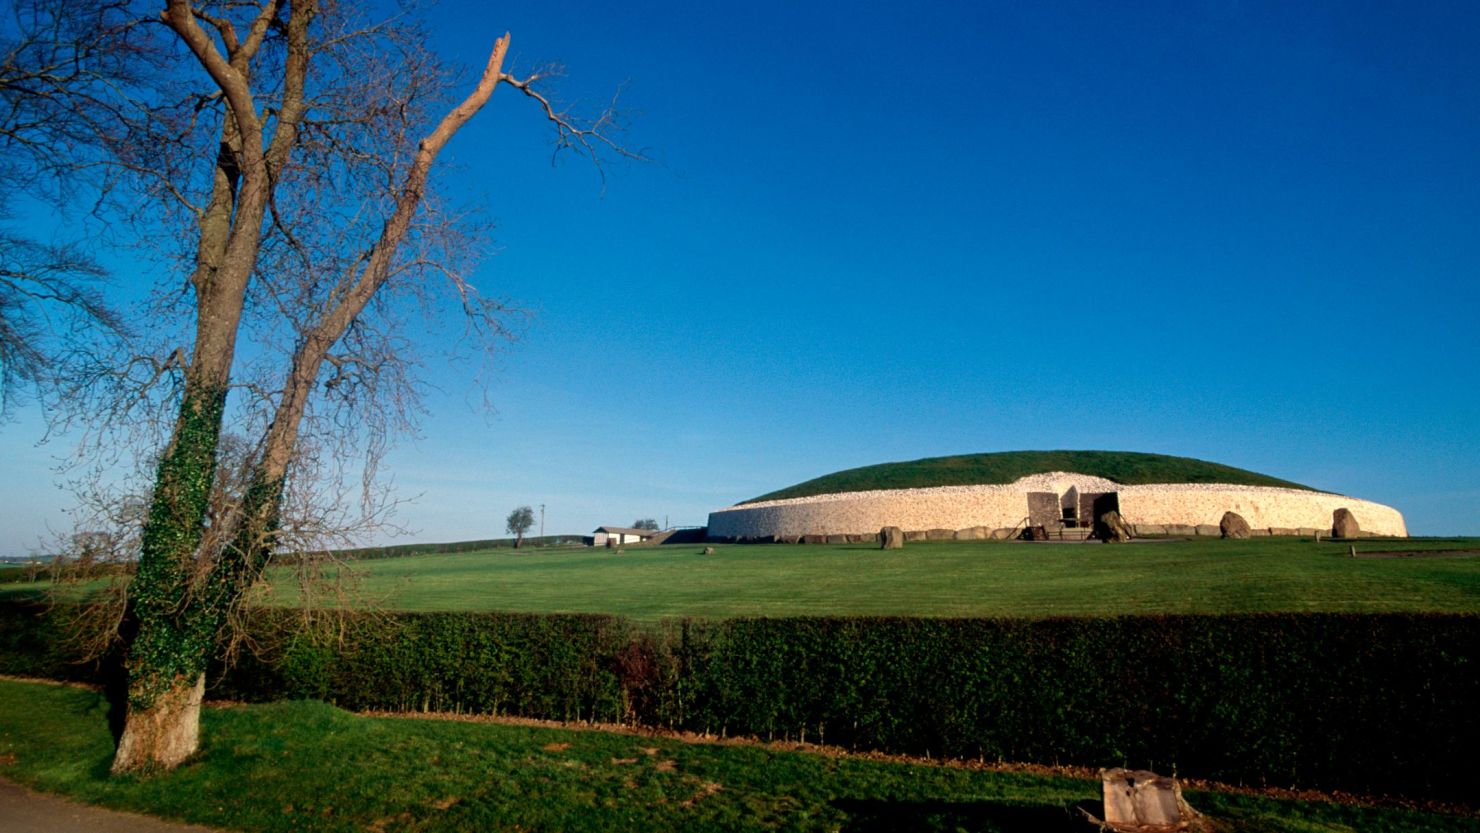 Newgrange passage tomb is in County Meath, in the east of Ireland.